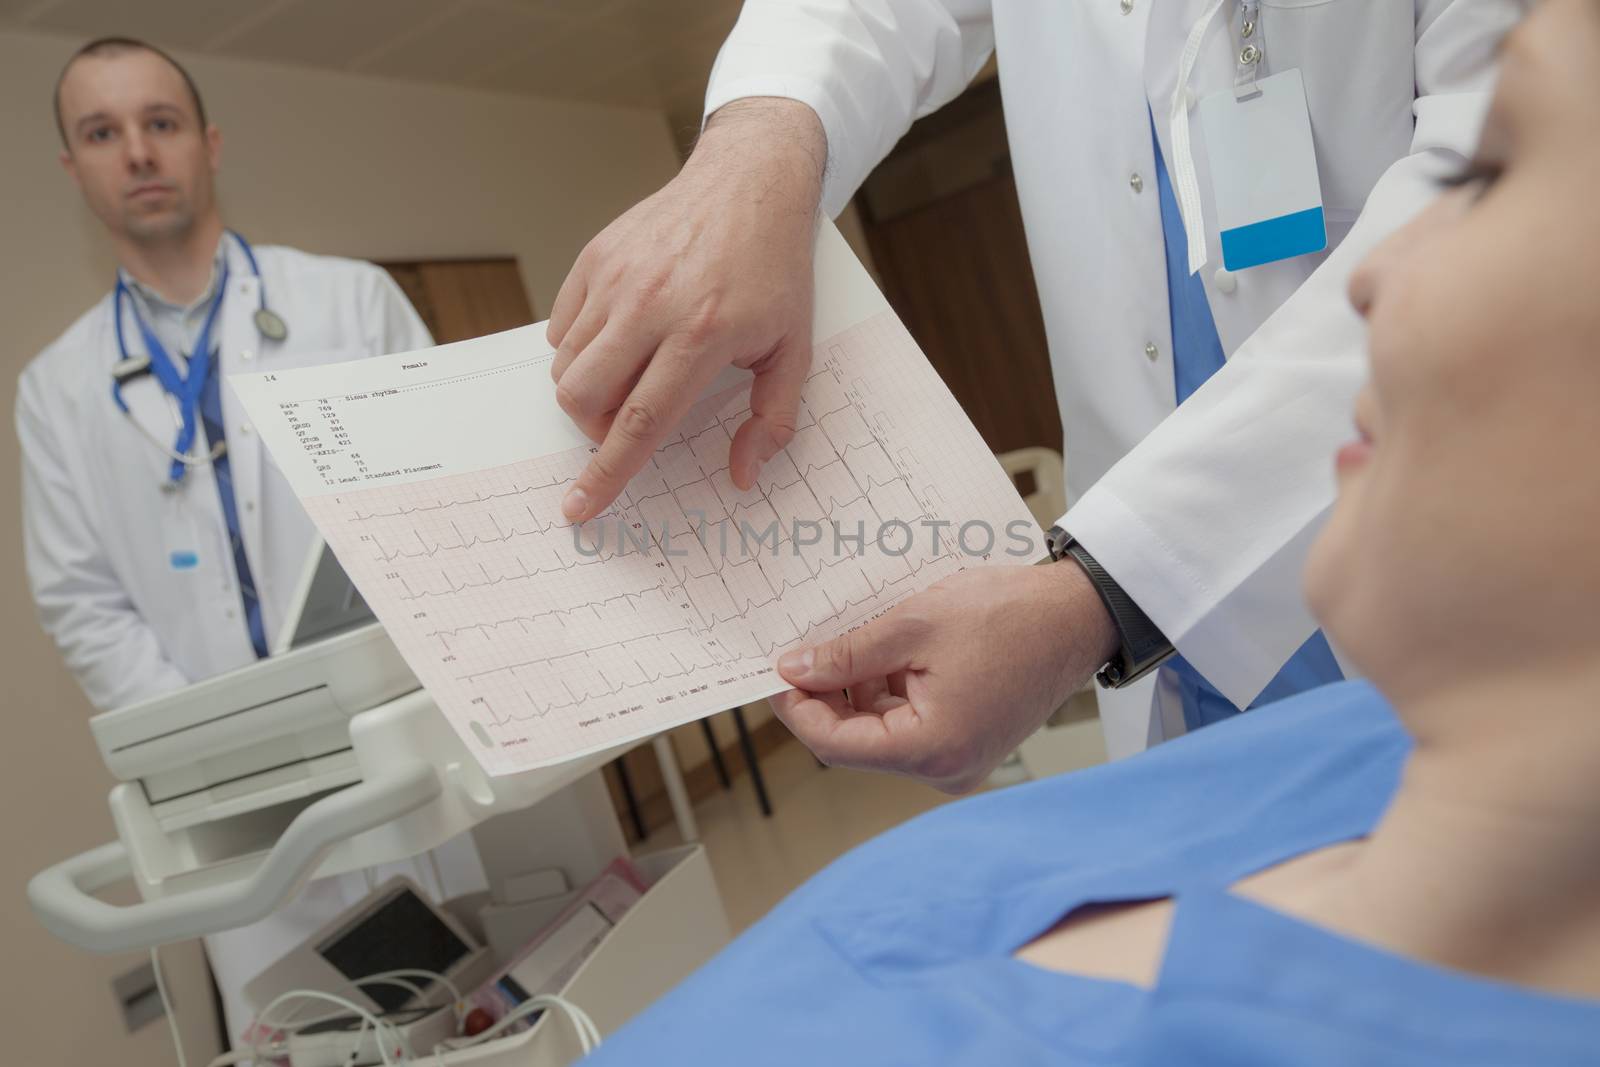 A cardiogram with a normal heart beat rate is shown to a pleased young female patient.